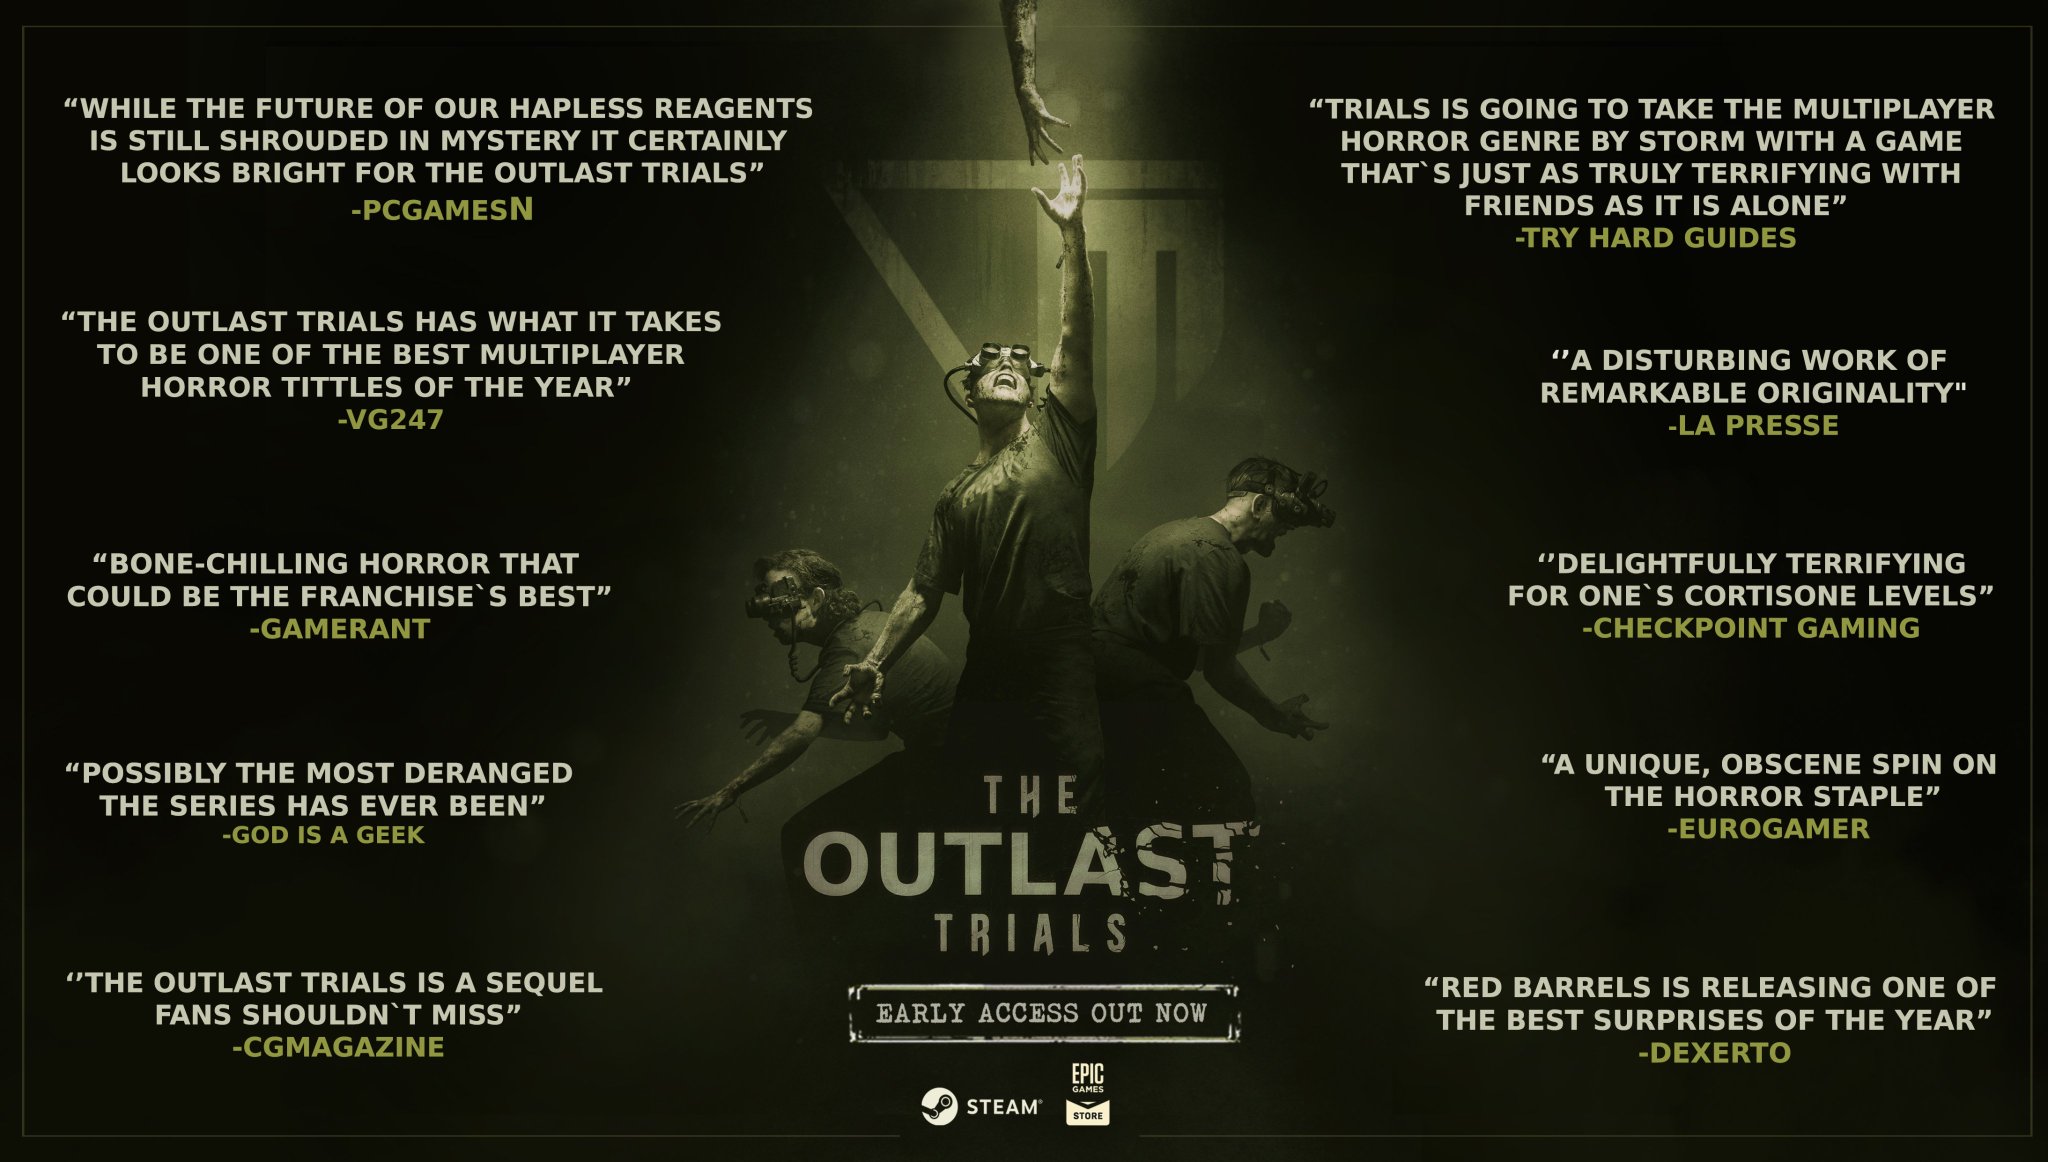 The Outlast Trials Early Access coming May 18th, 2023 - Red Barrels